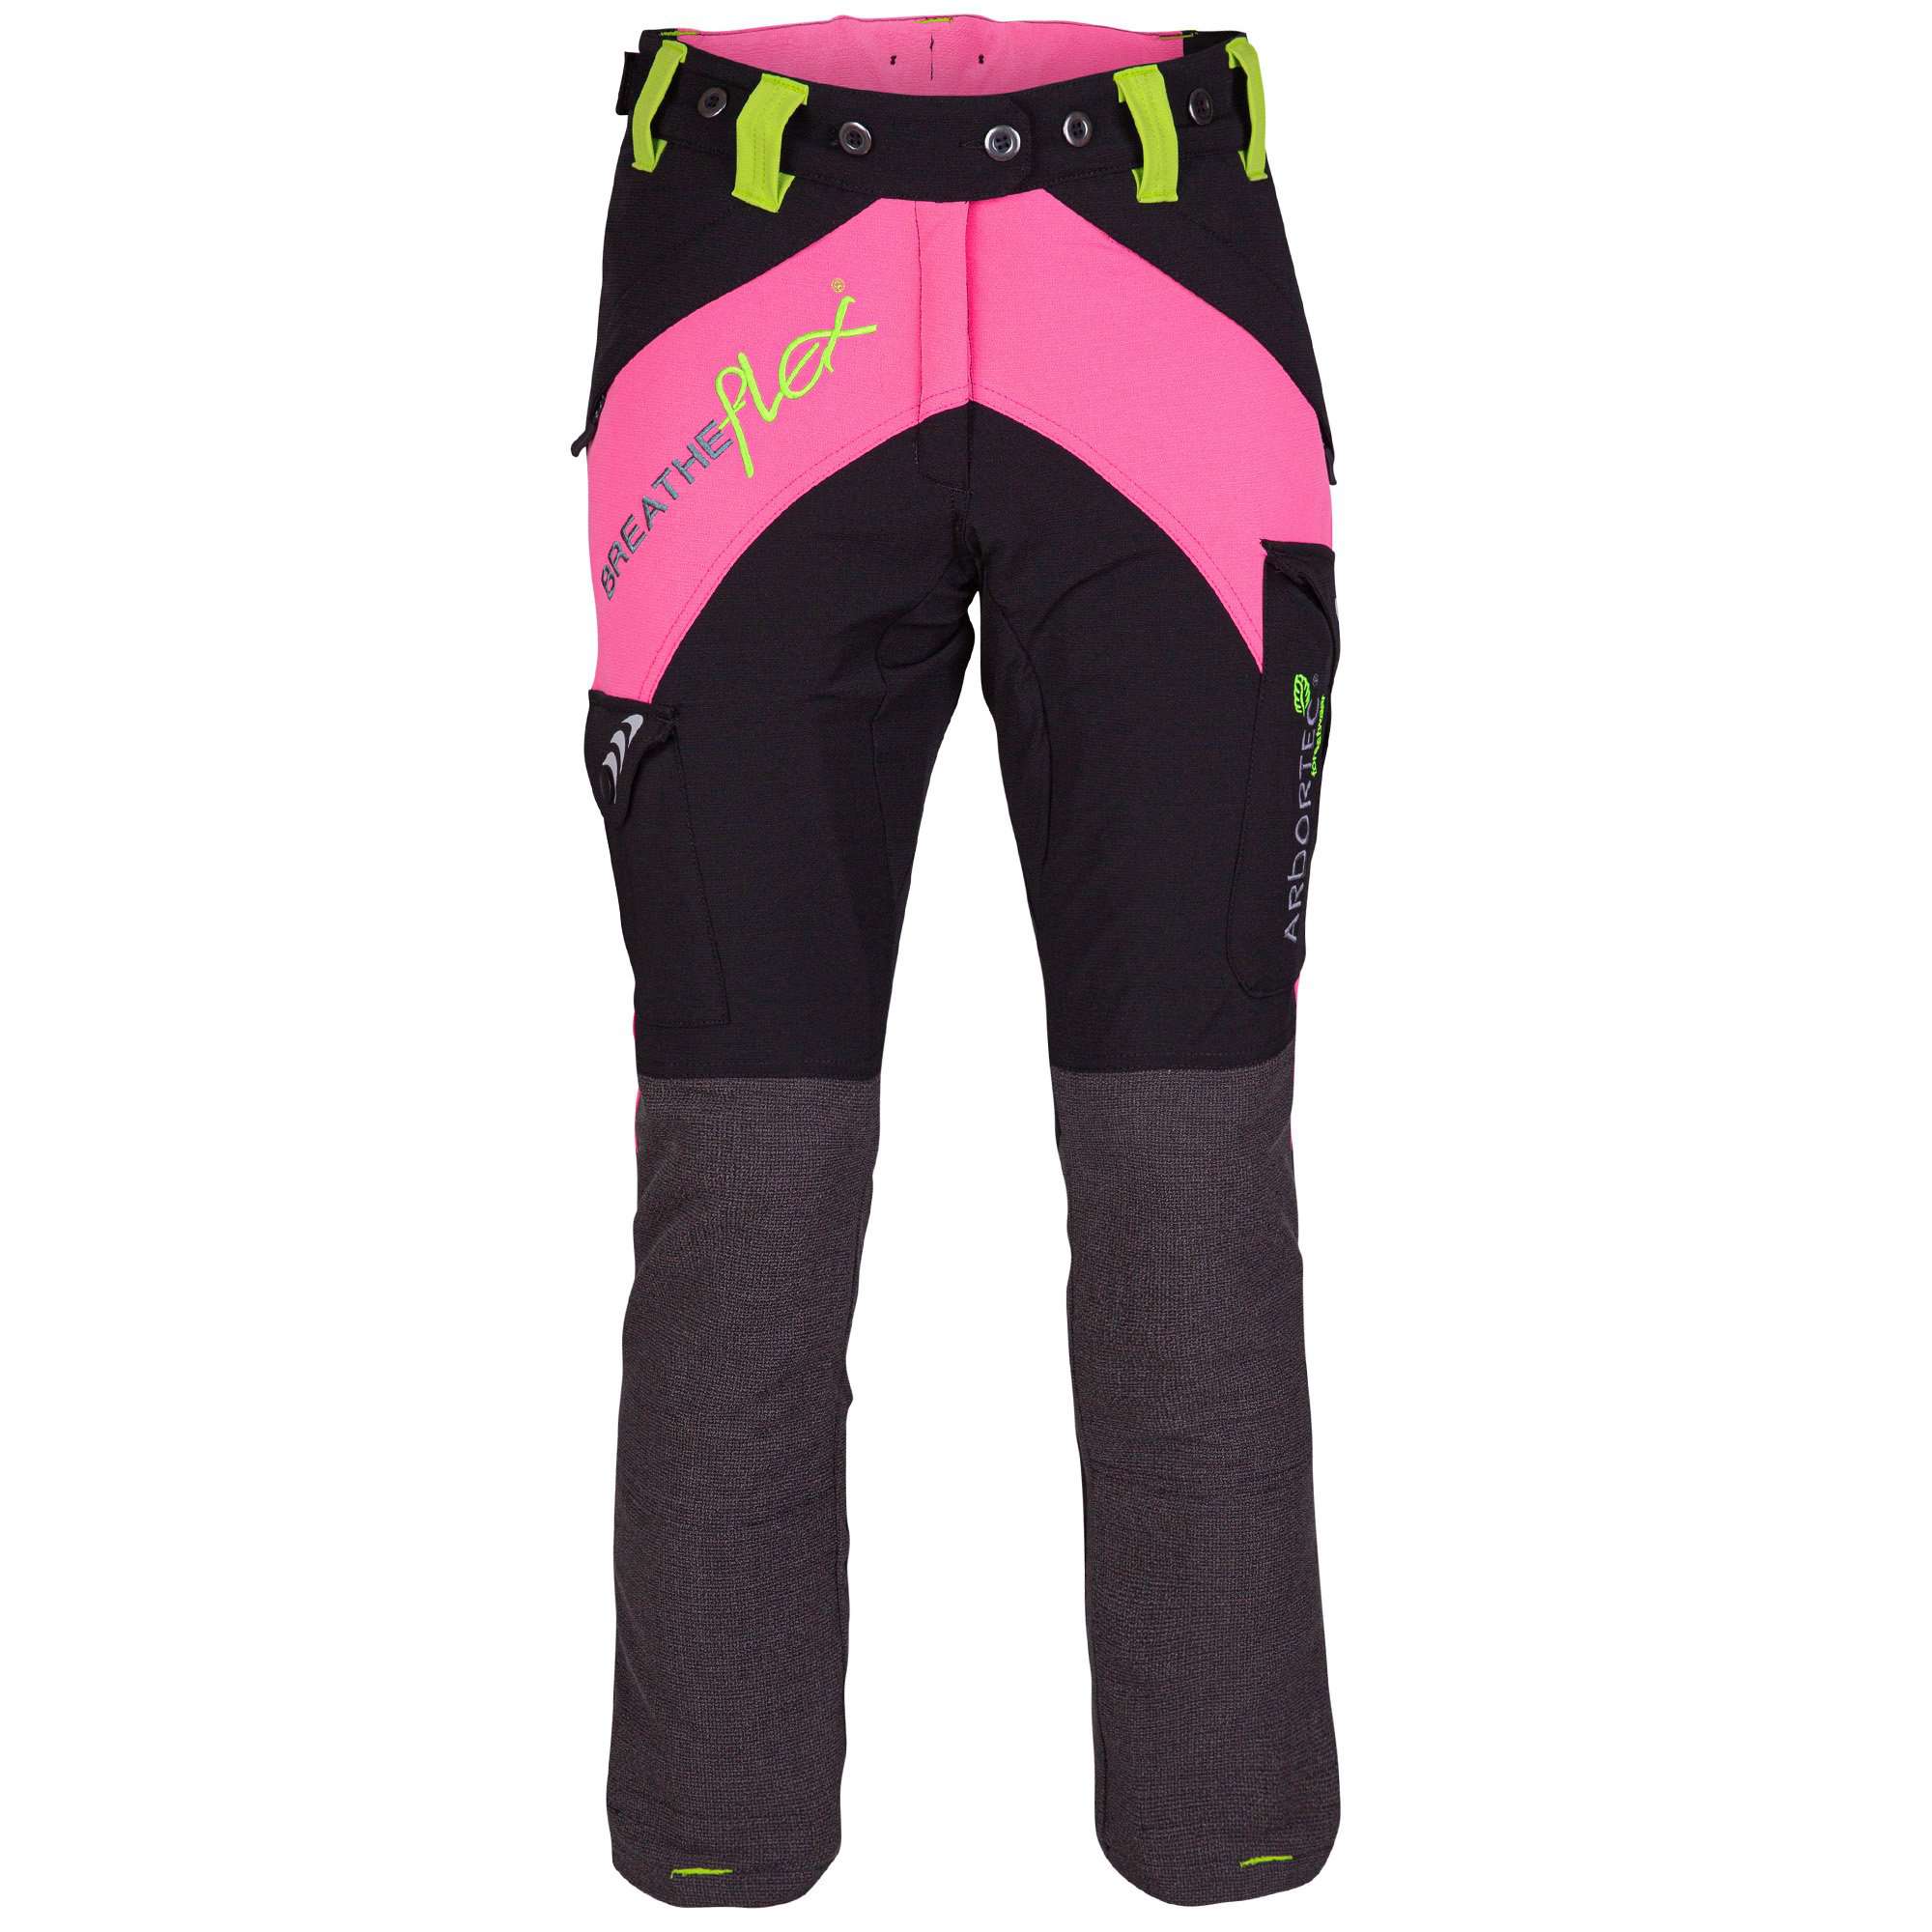 AT4010 Breatheflex Ladies Type A Class 1 Chainsaw Trousers - Pink - Arbortec Forestwear